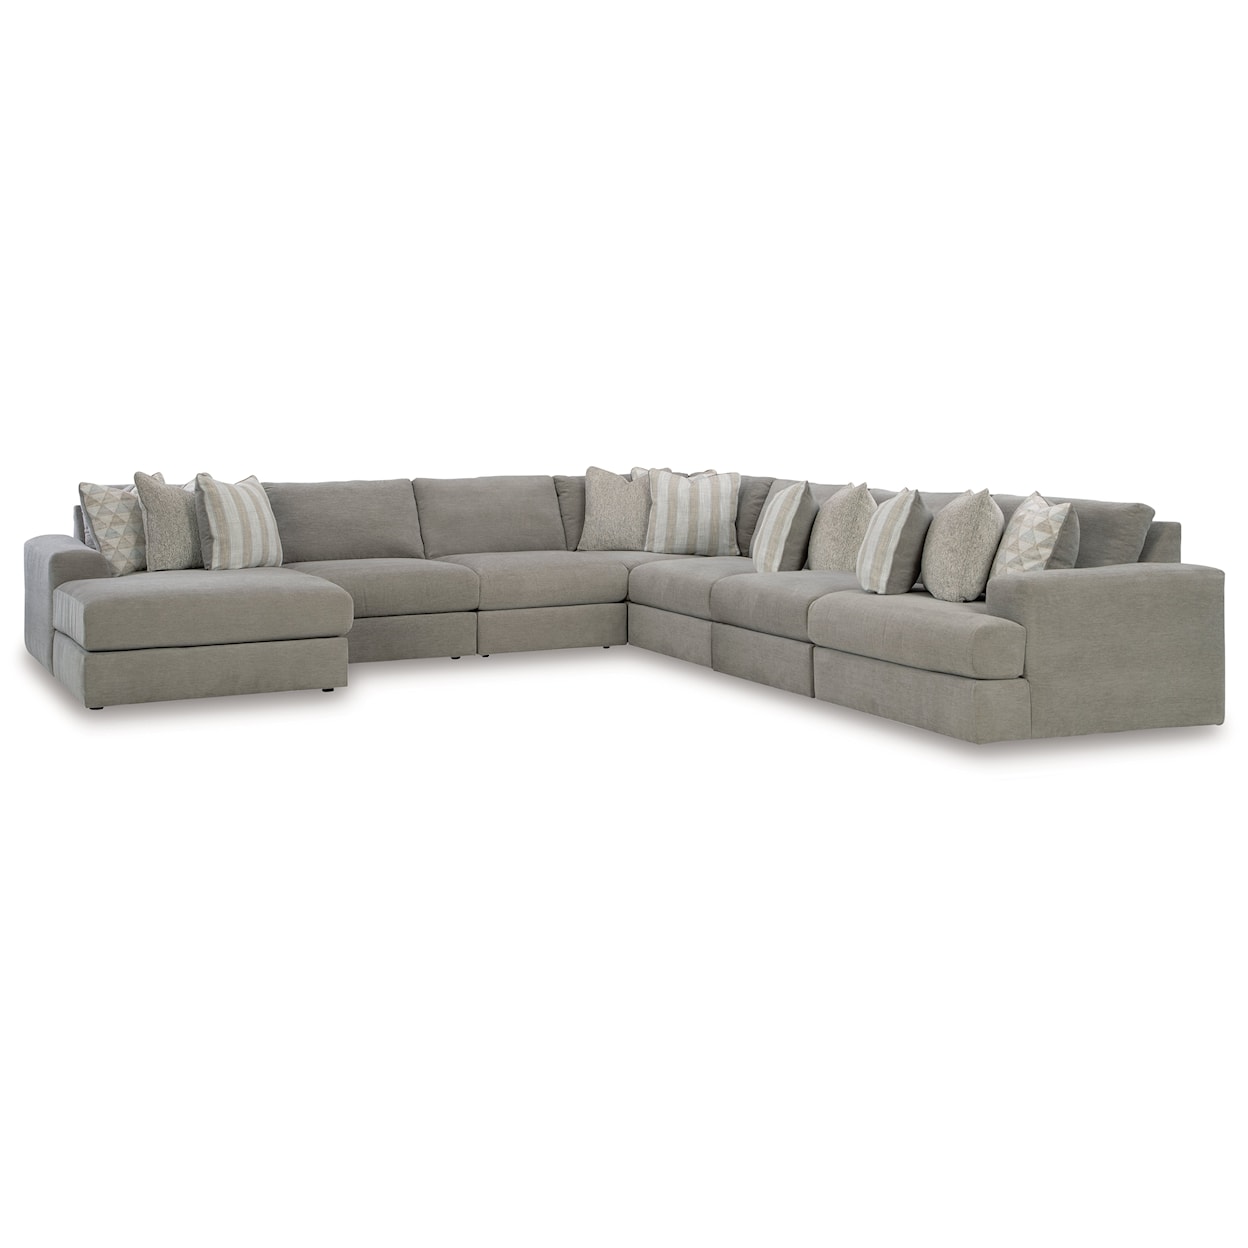 Signature Design by Ashley Avaliyah 7-Piece Sectional with Chaise